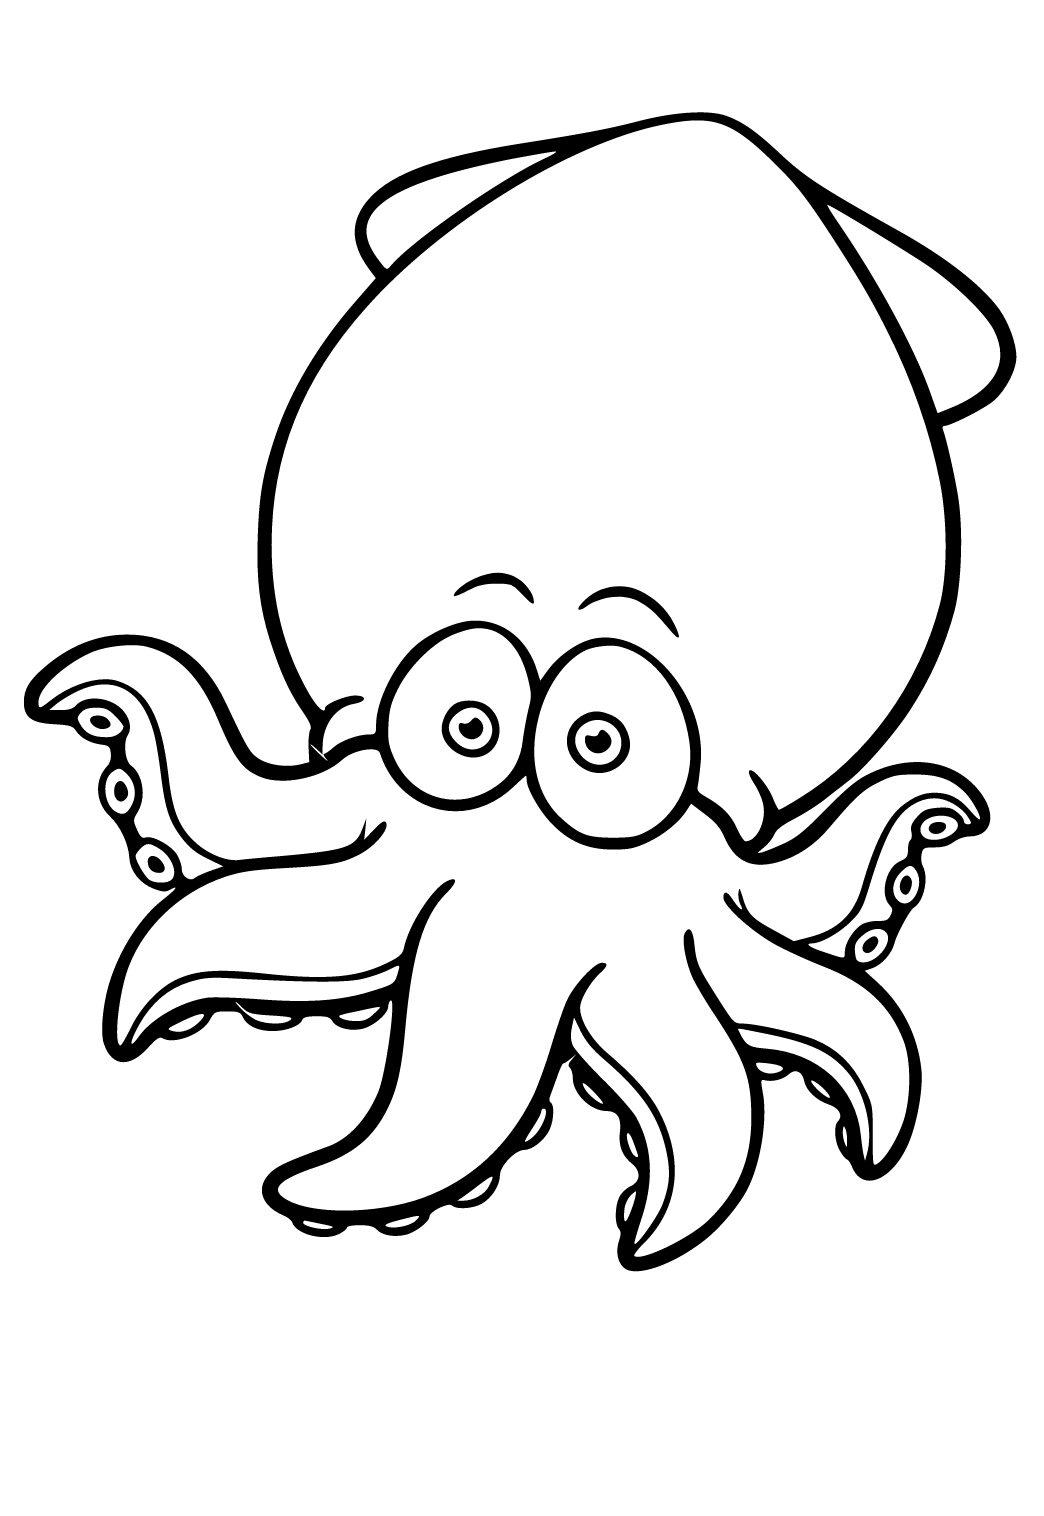 Free Printable Octopus Funny Coloring Page for Adults and Kids - Lystok.com